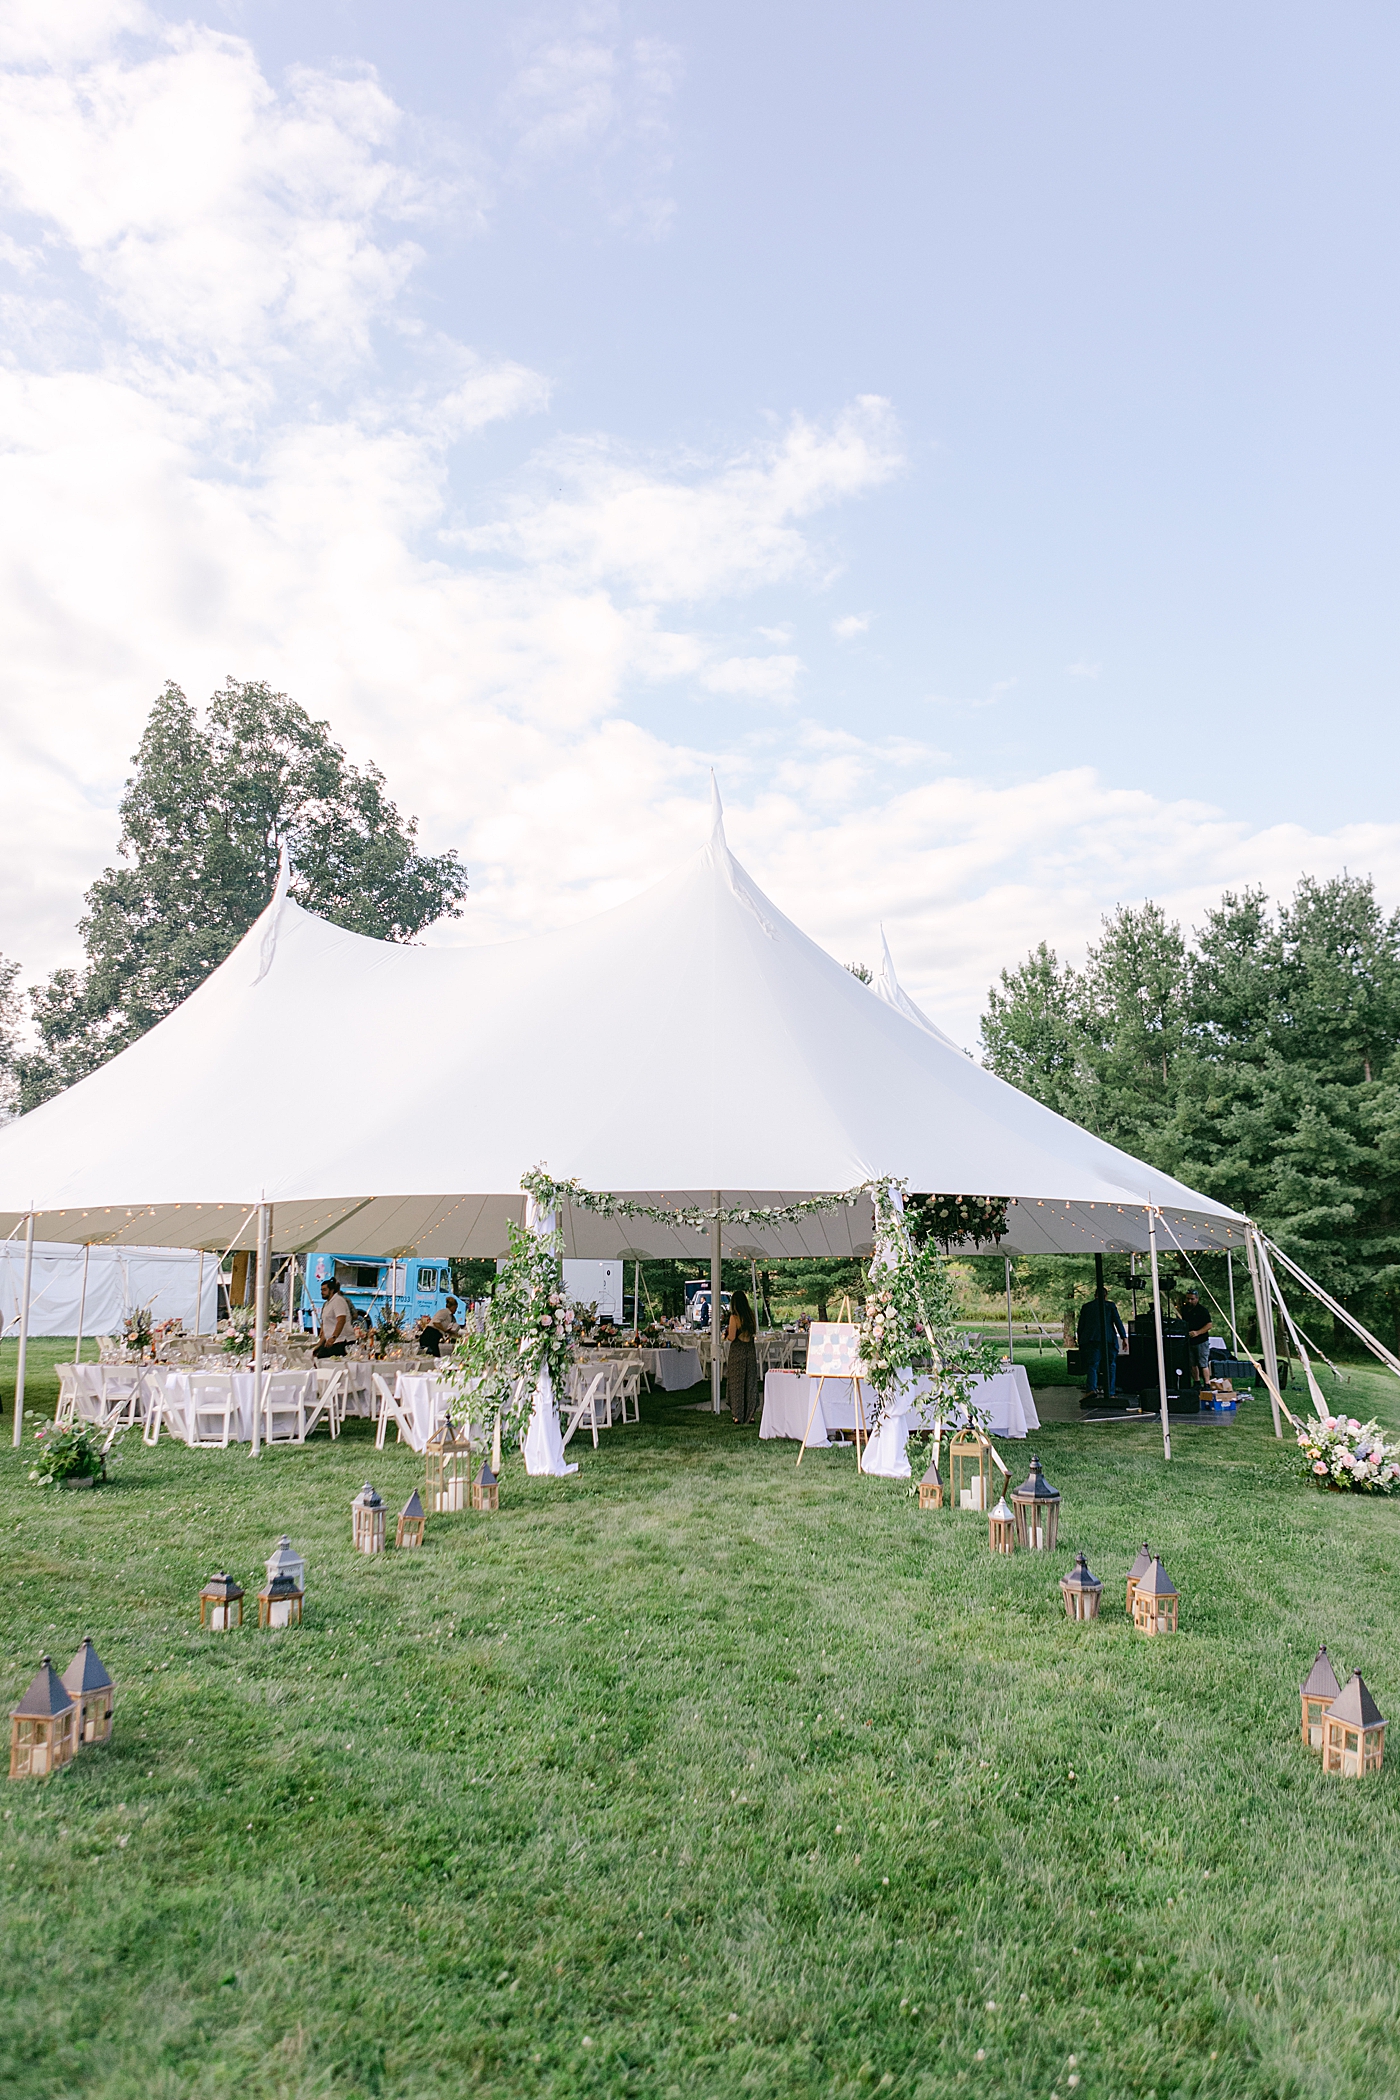 Tent during wedding reception | Image by Hope Helmuth Photography